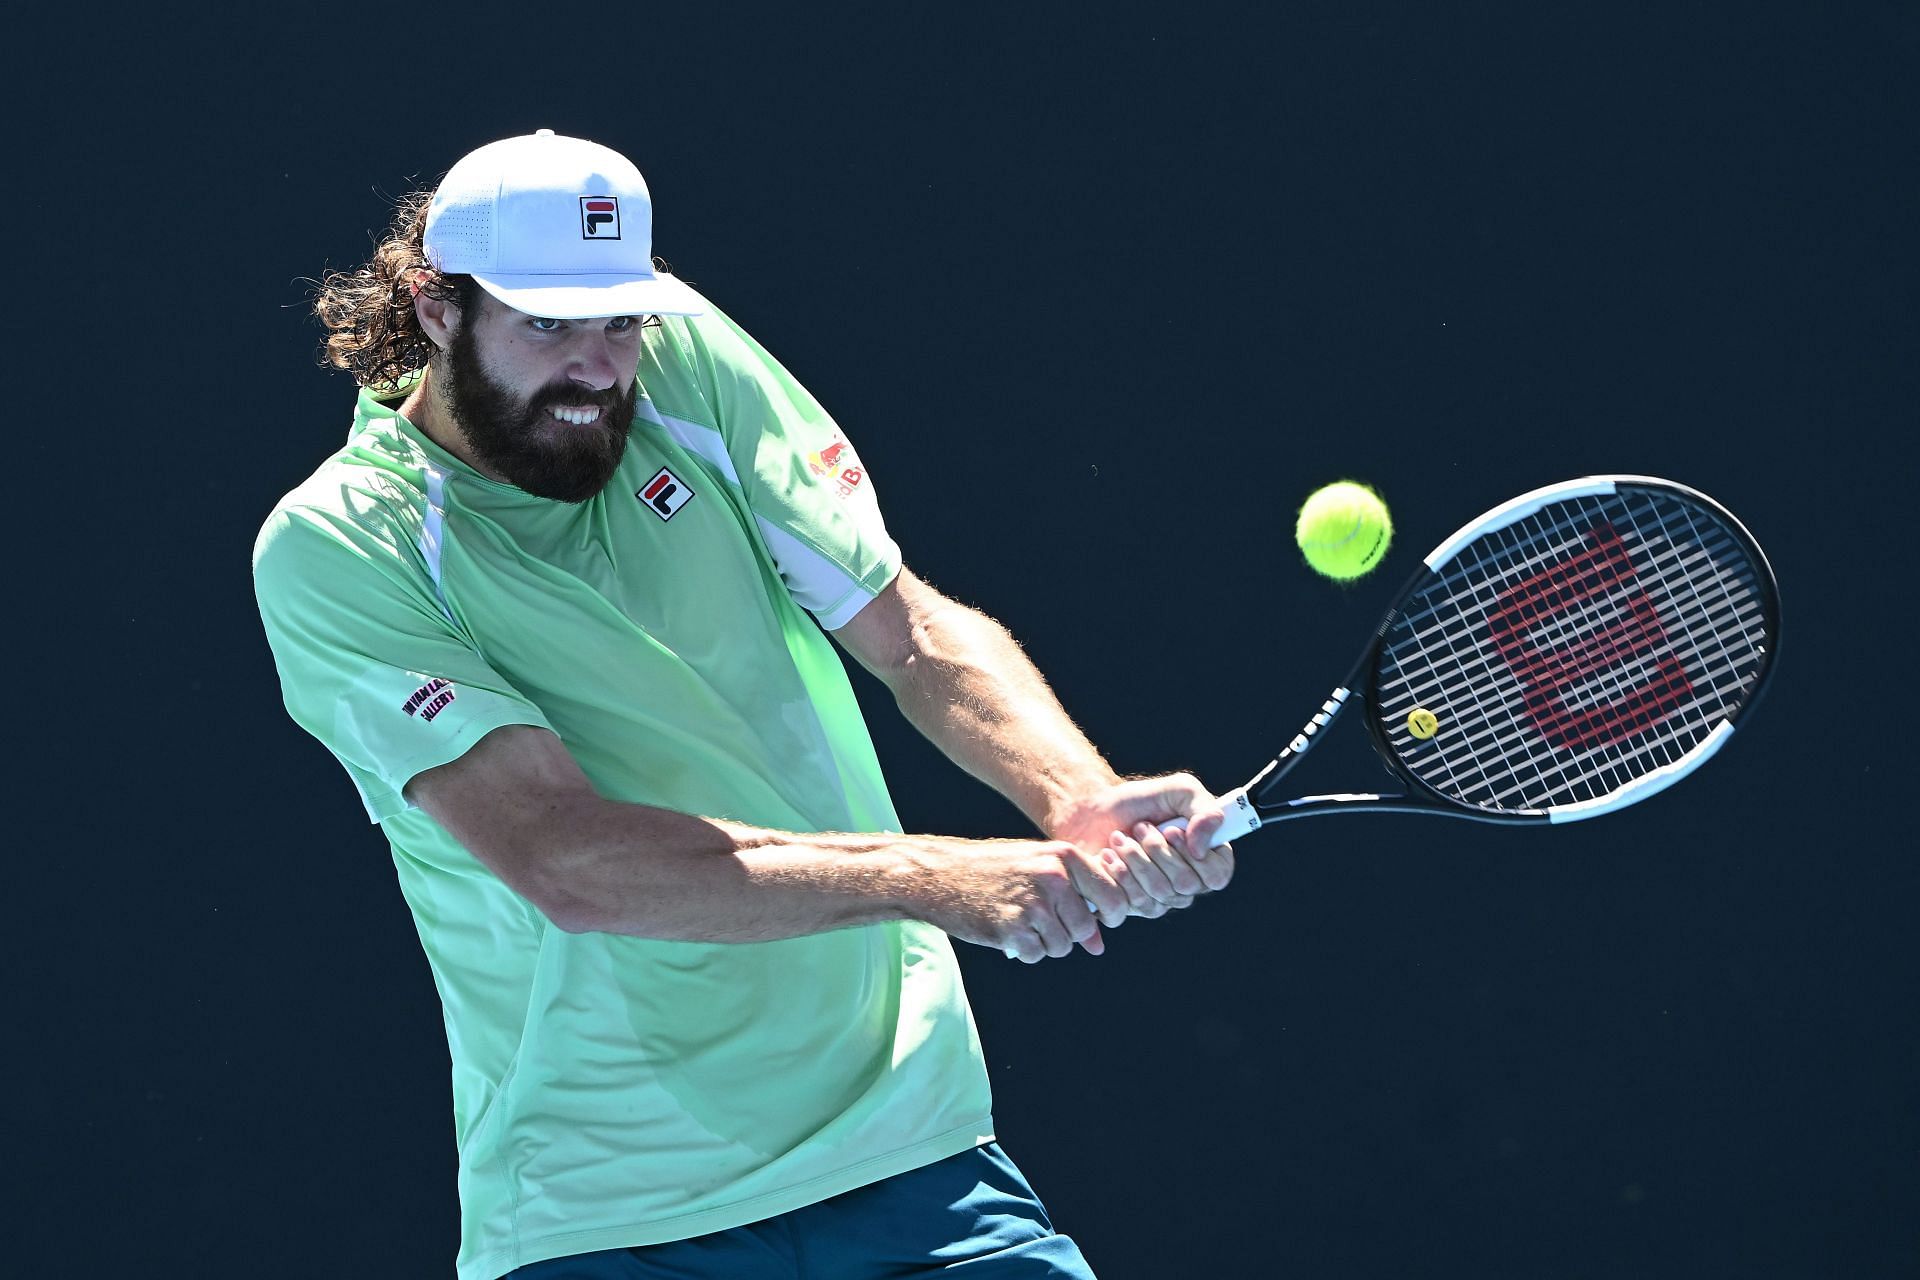 Opelka is among the favorites to win the Delray Beach Open